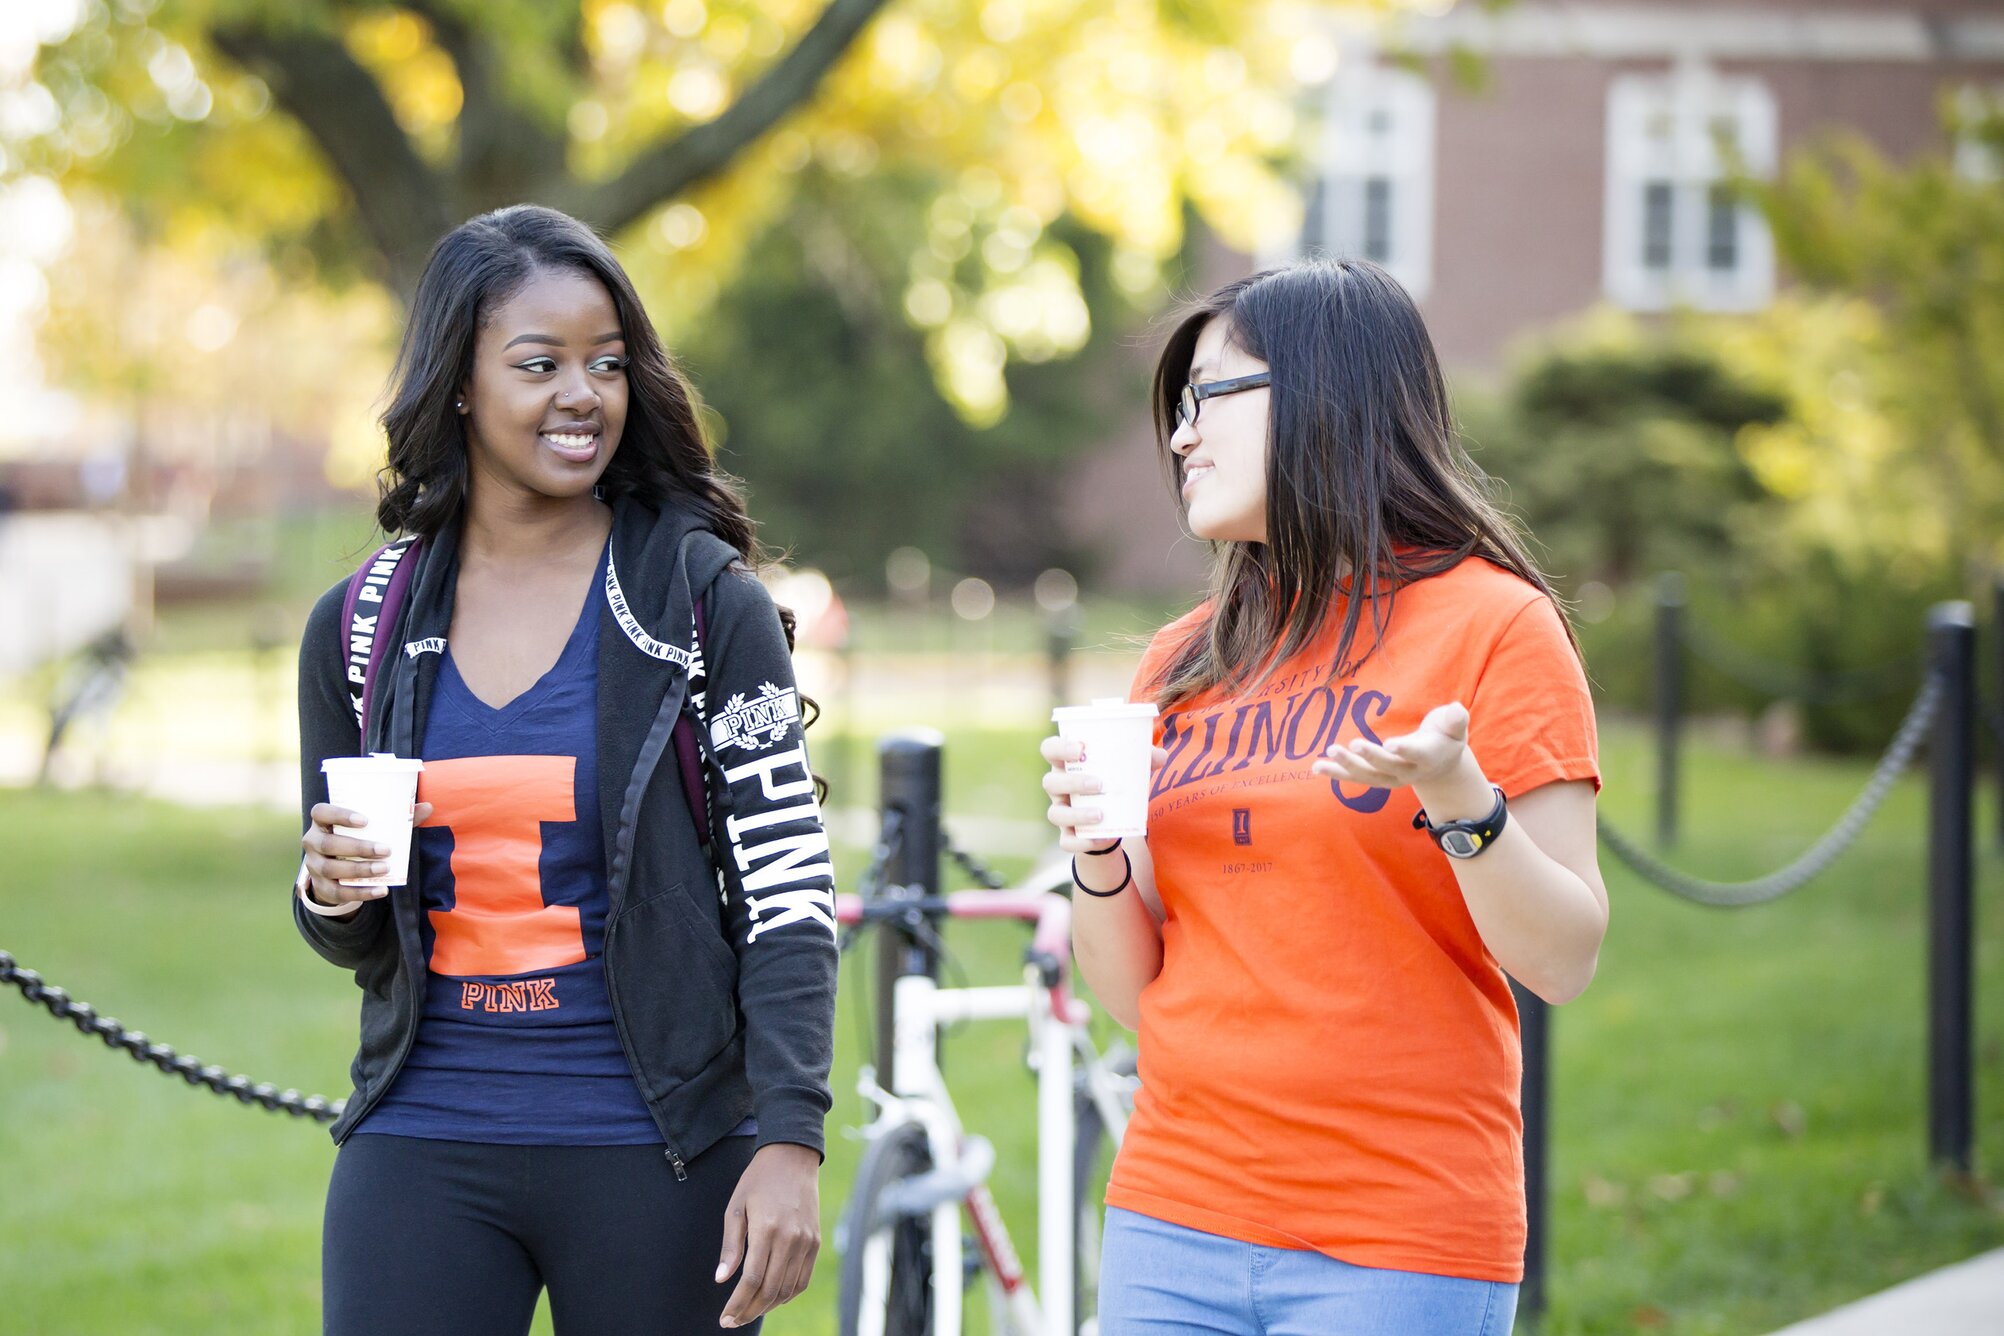 Two female students in Illini gear walking and talking